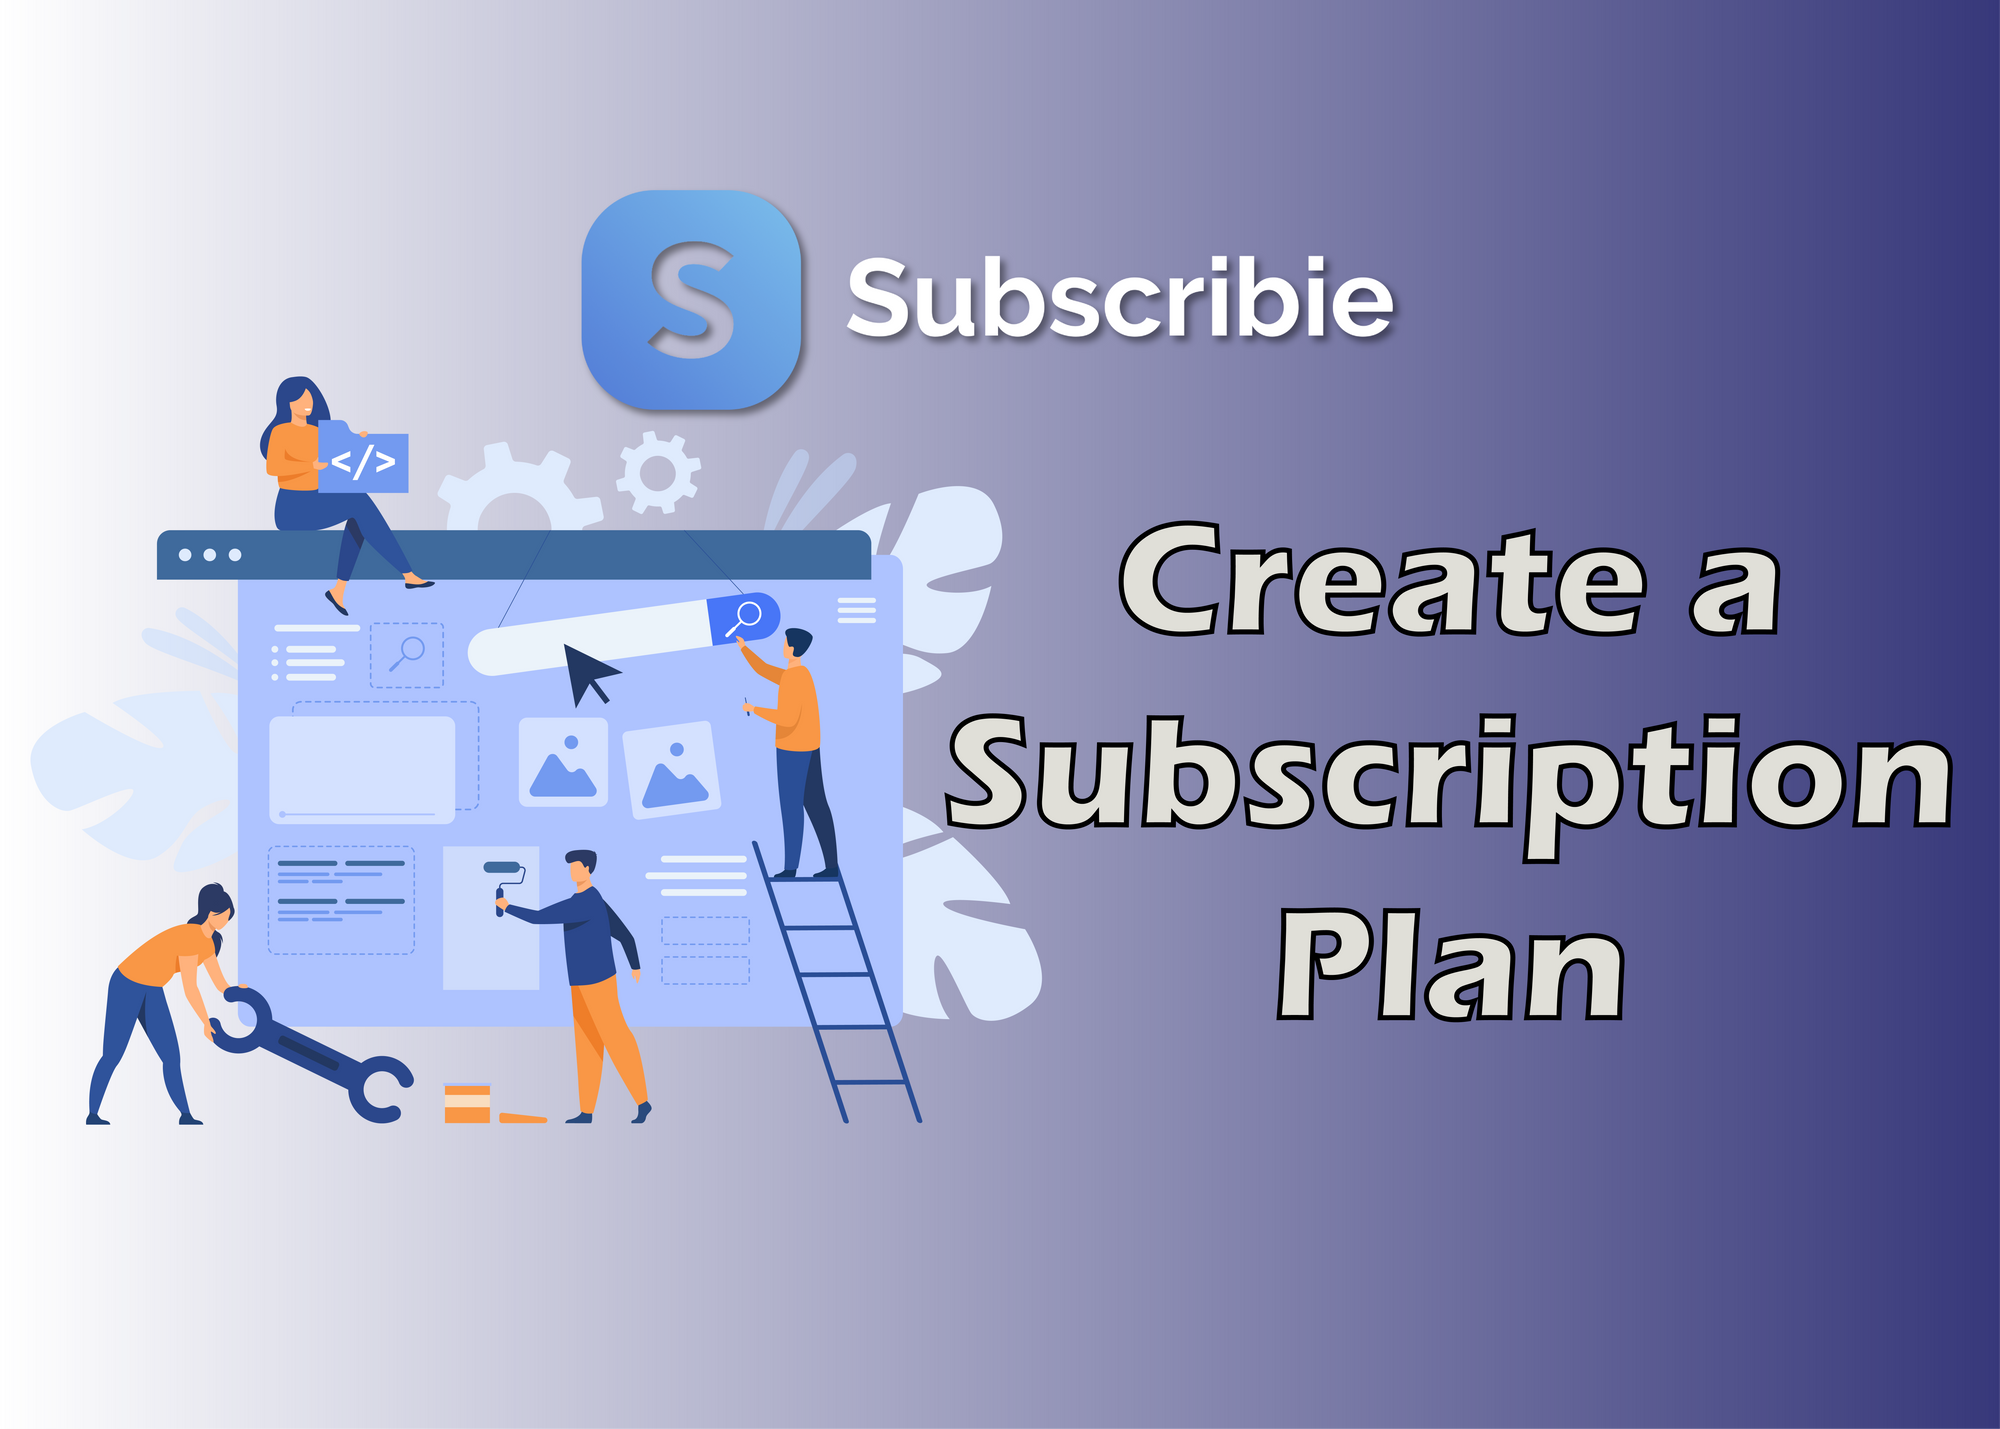 How to Create a Subscription Plan like Stripe